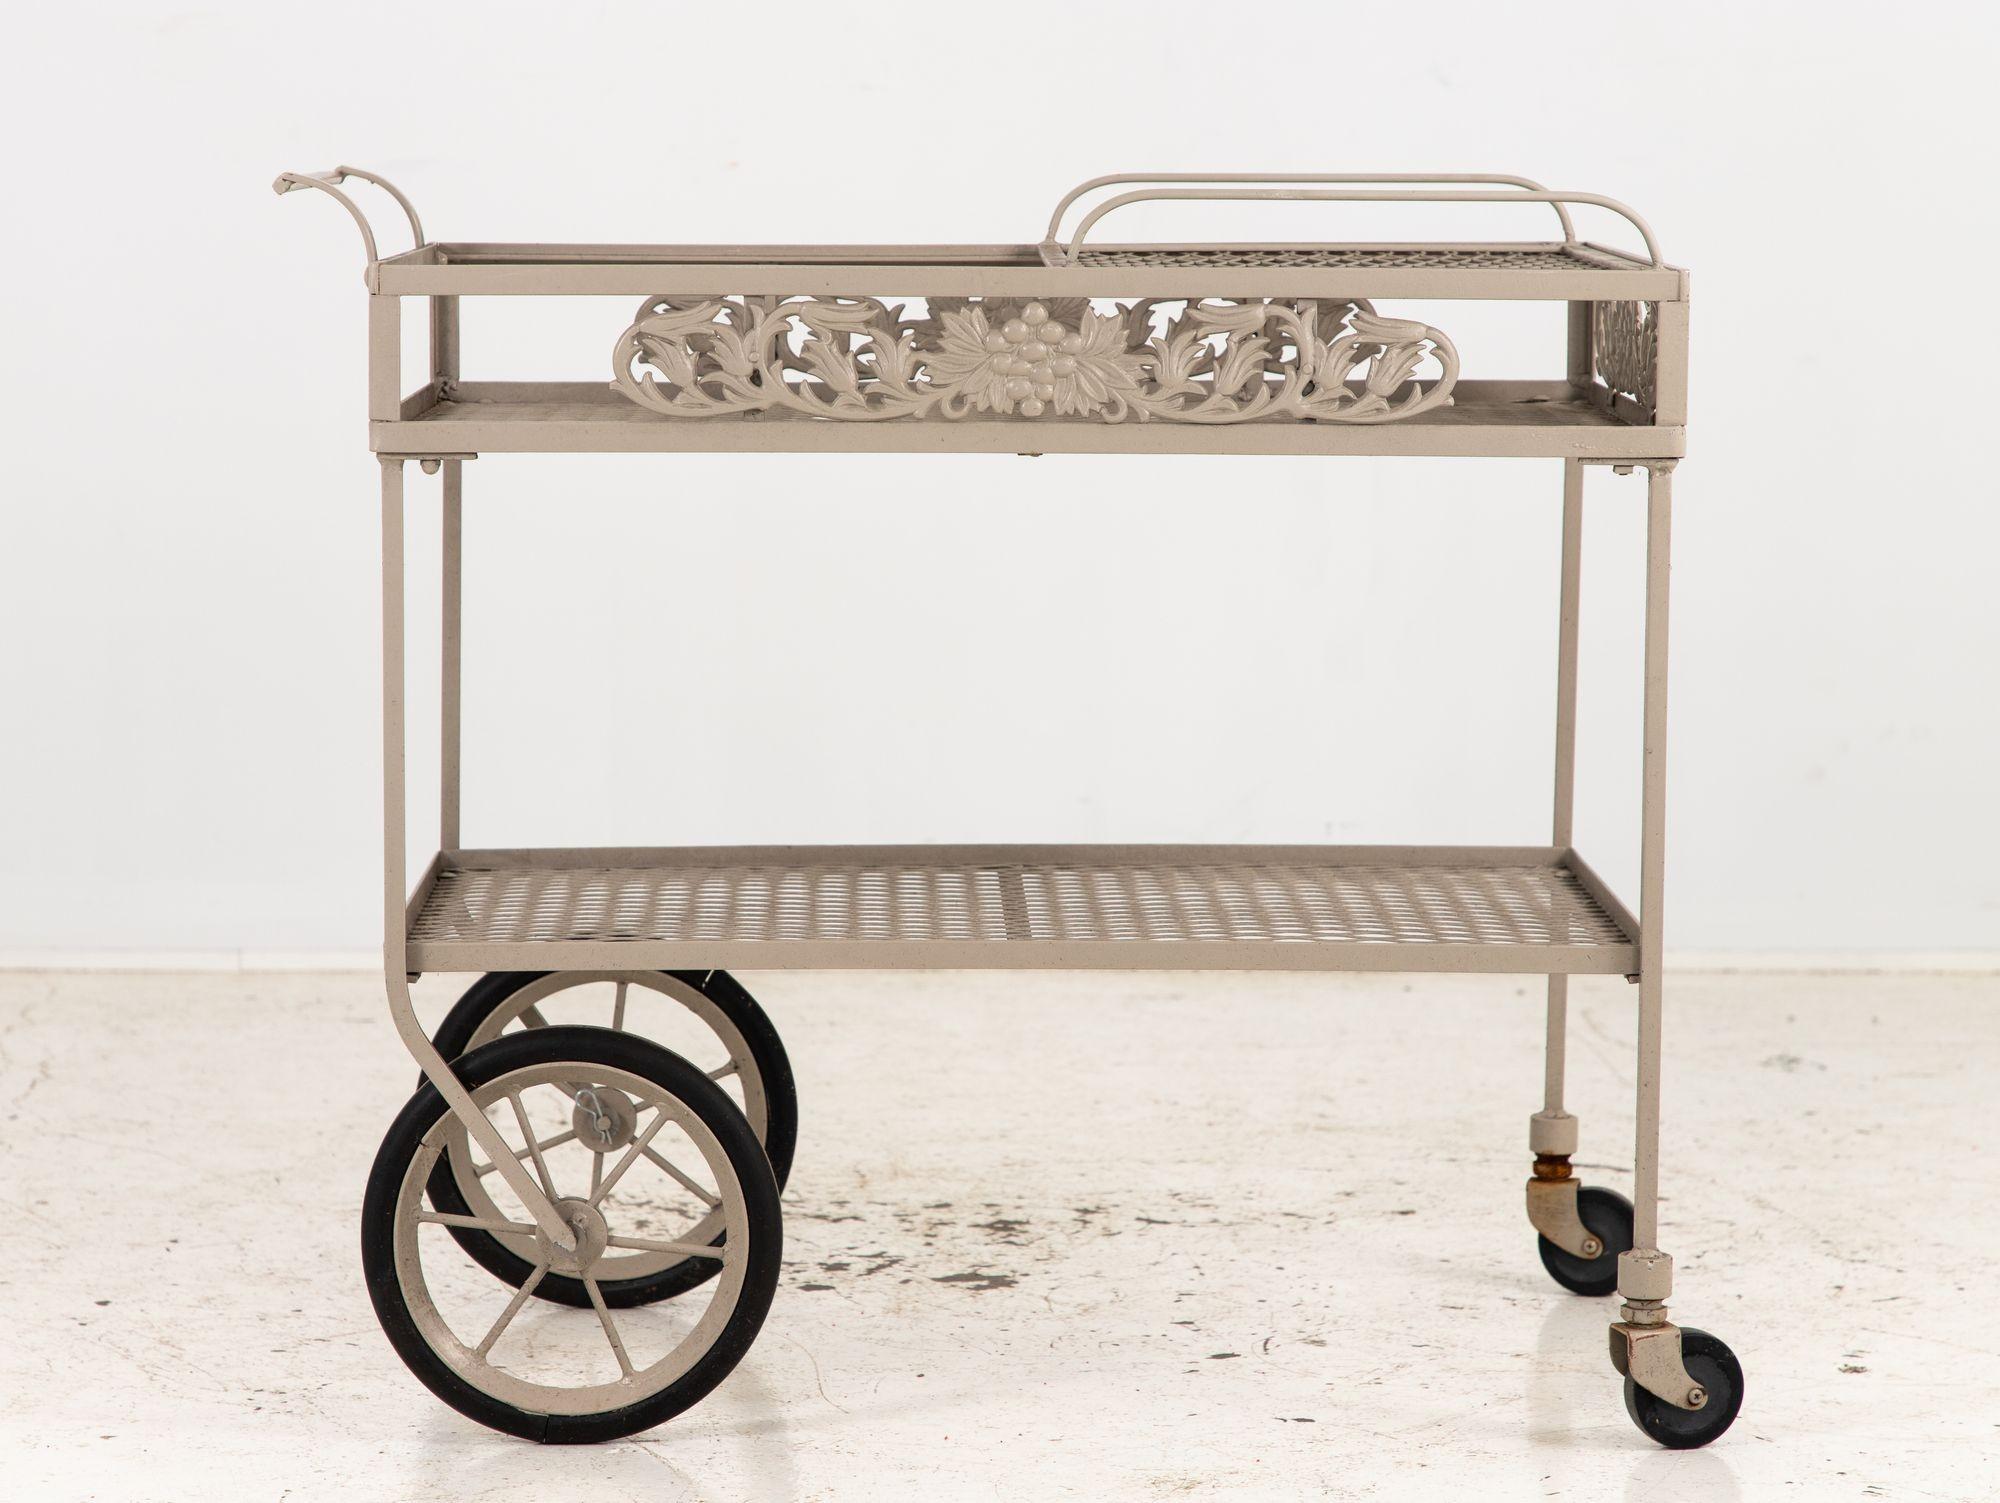 An Aluminum Garden Bar Cart on Casters, boasts a luscious Grape and Grape Leaf Motif, reminiscent of Molla's timeless design. Crafted with precision and finesse, this cart seamlessly combines functionality with style. Its later gray paint on an